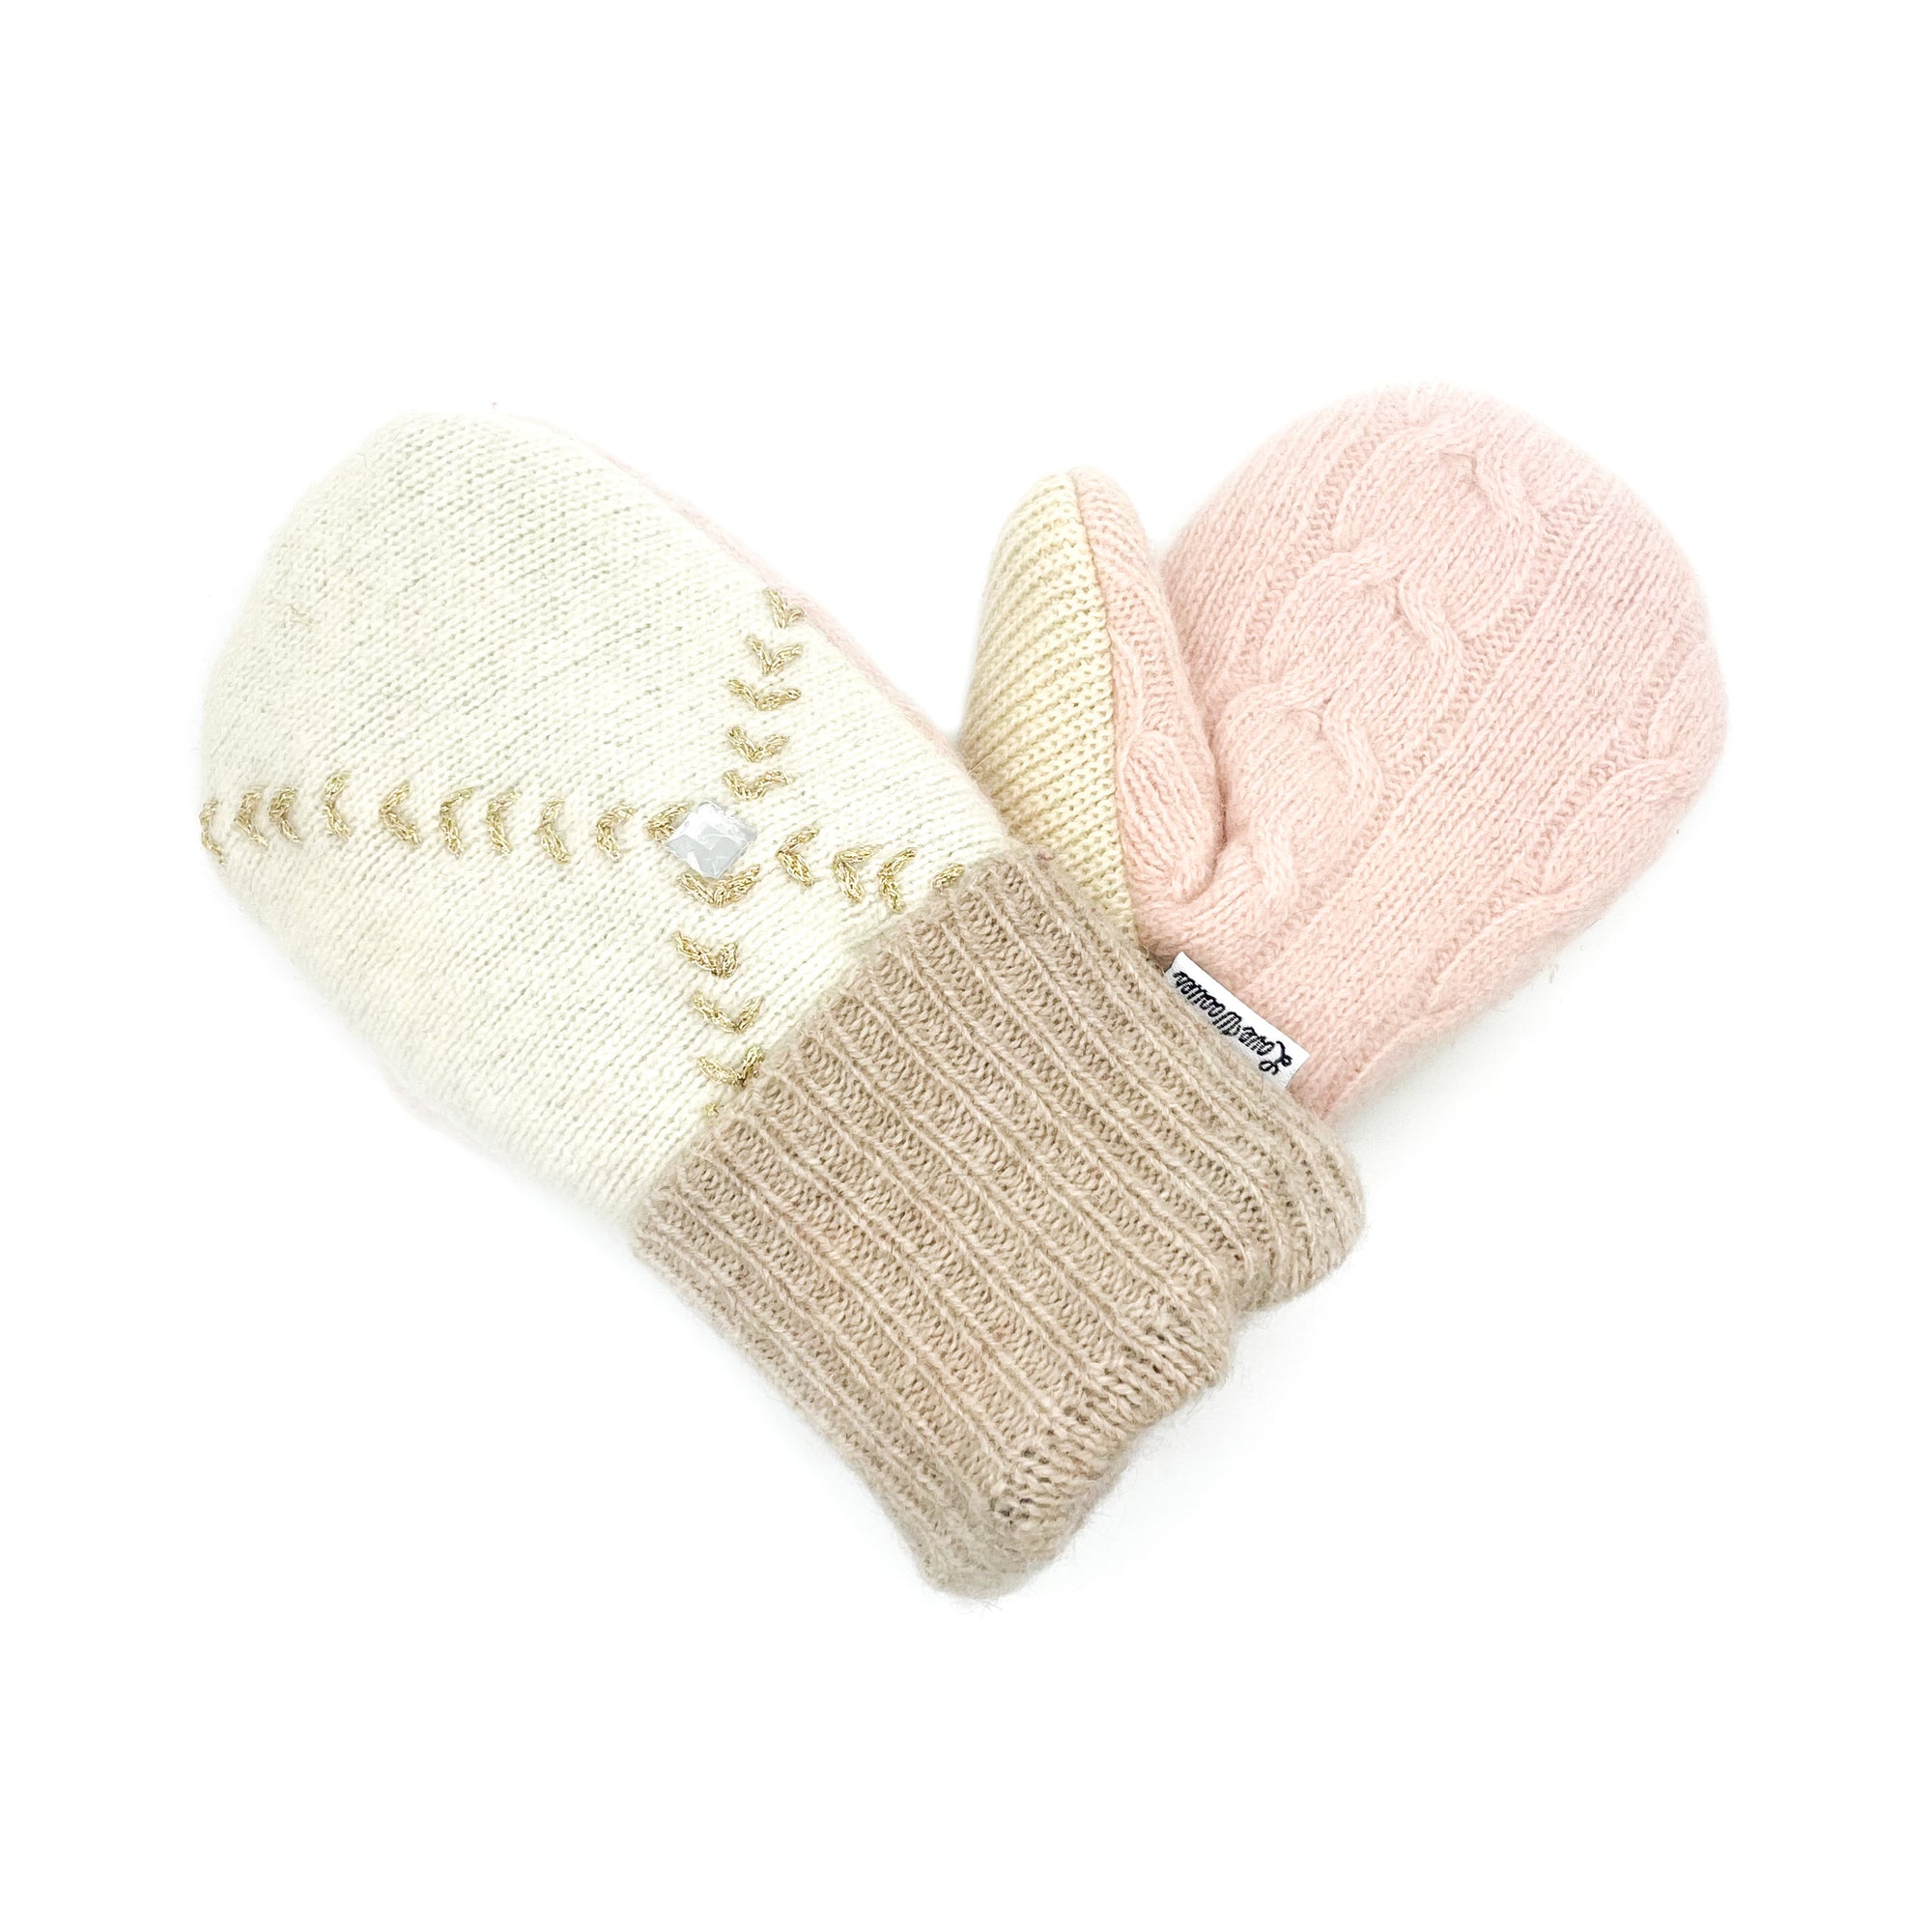 Large Kid's Wool Sweater Mittens | Helping Hands